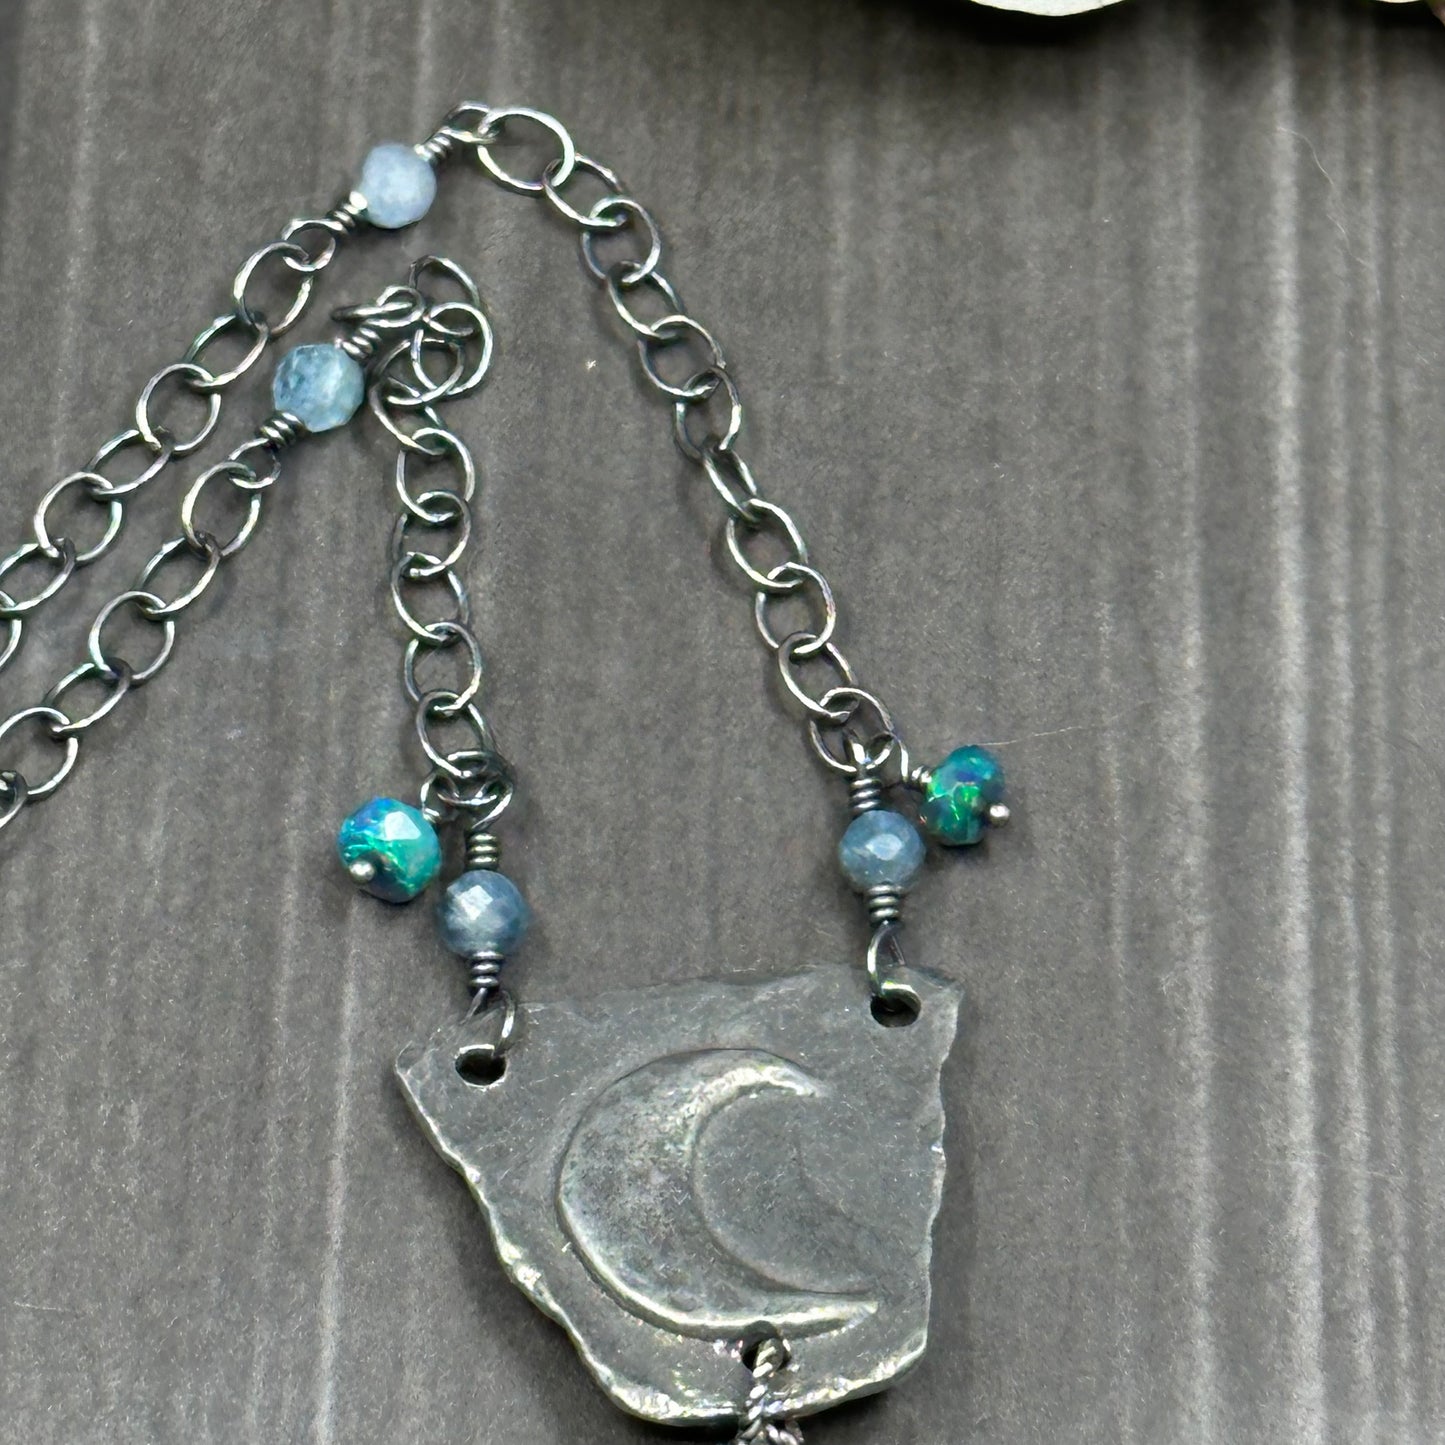 Sterling silver, labradorite, opal, and pewter necklace